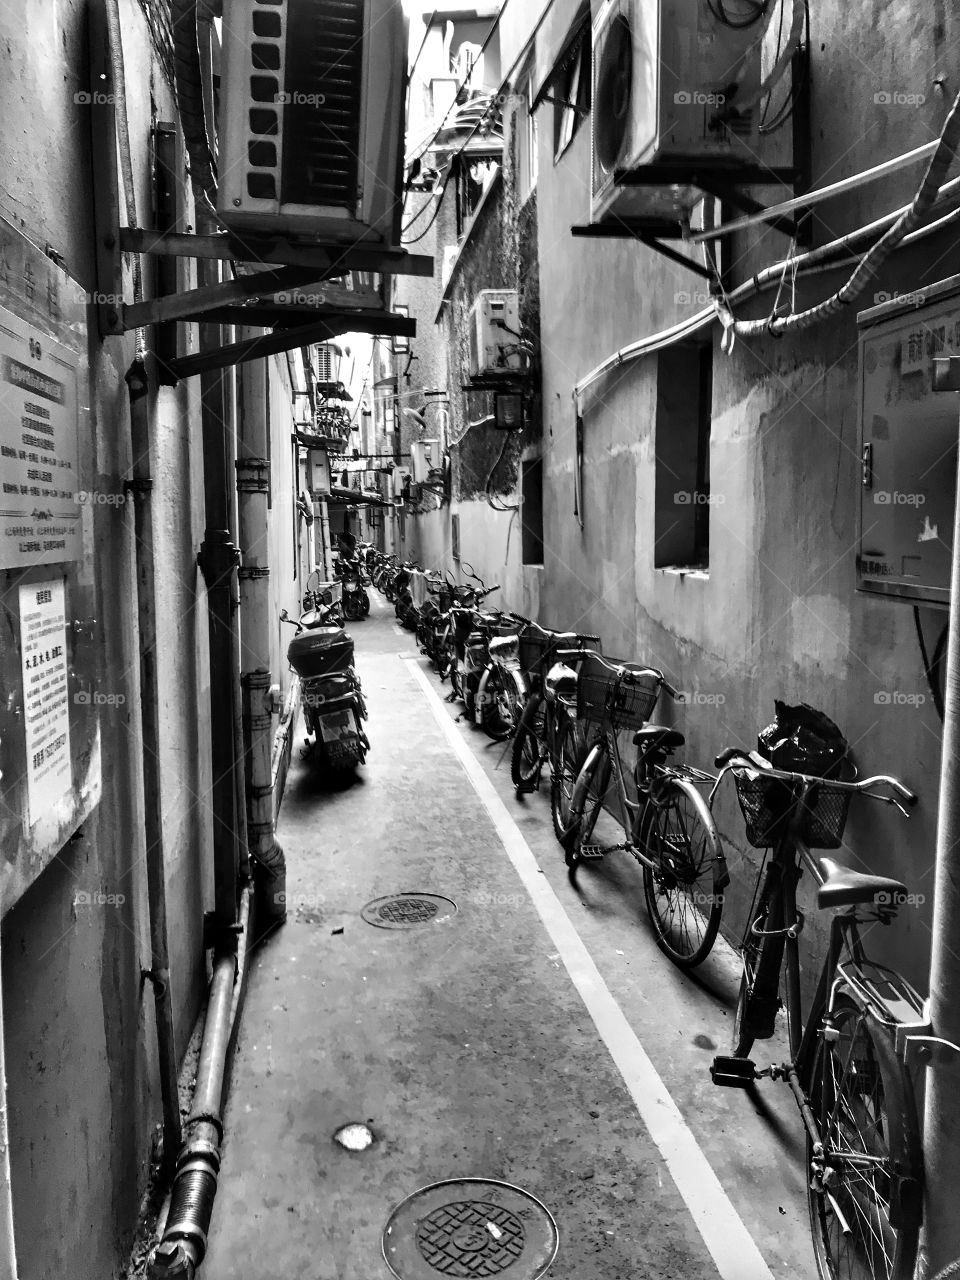 Xintiandi back alley - and you thought the bicycles have all gone having been replaced by scooters.... well they are still here 